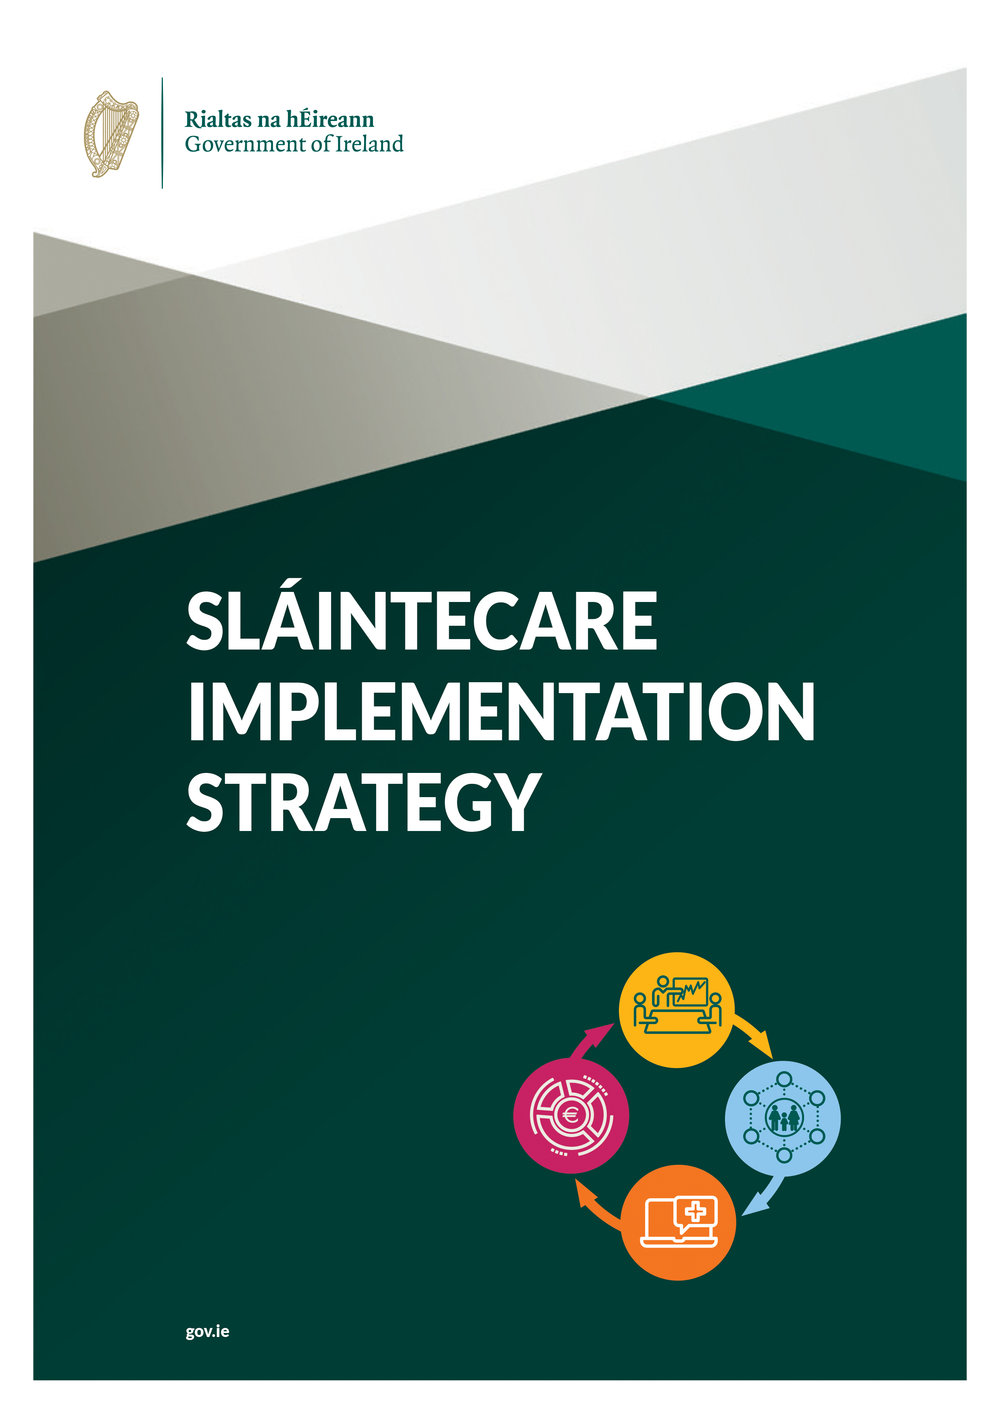 Head of Fórsa’s Health division Éamonn Donnelly said the publication of the strategy is a welcome development and an important step towards the implementation of the reforms recommended in the Sláintecare report. He said a recruitment drive will be required to fulfil the aims of the strategy.